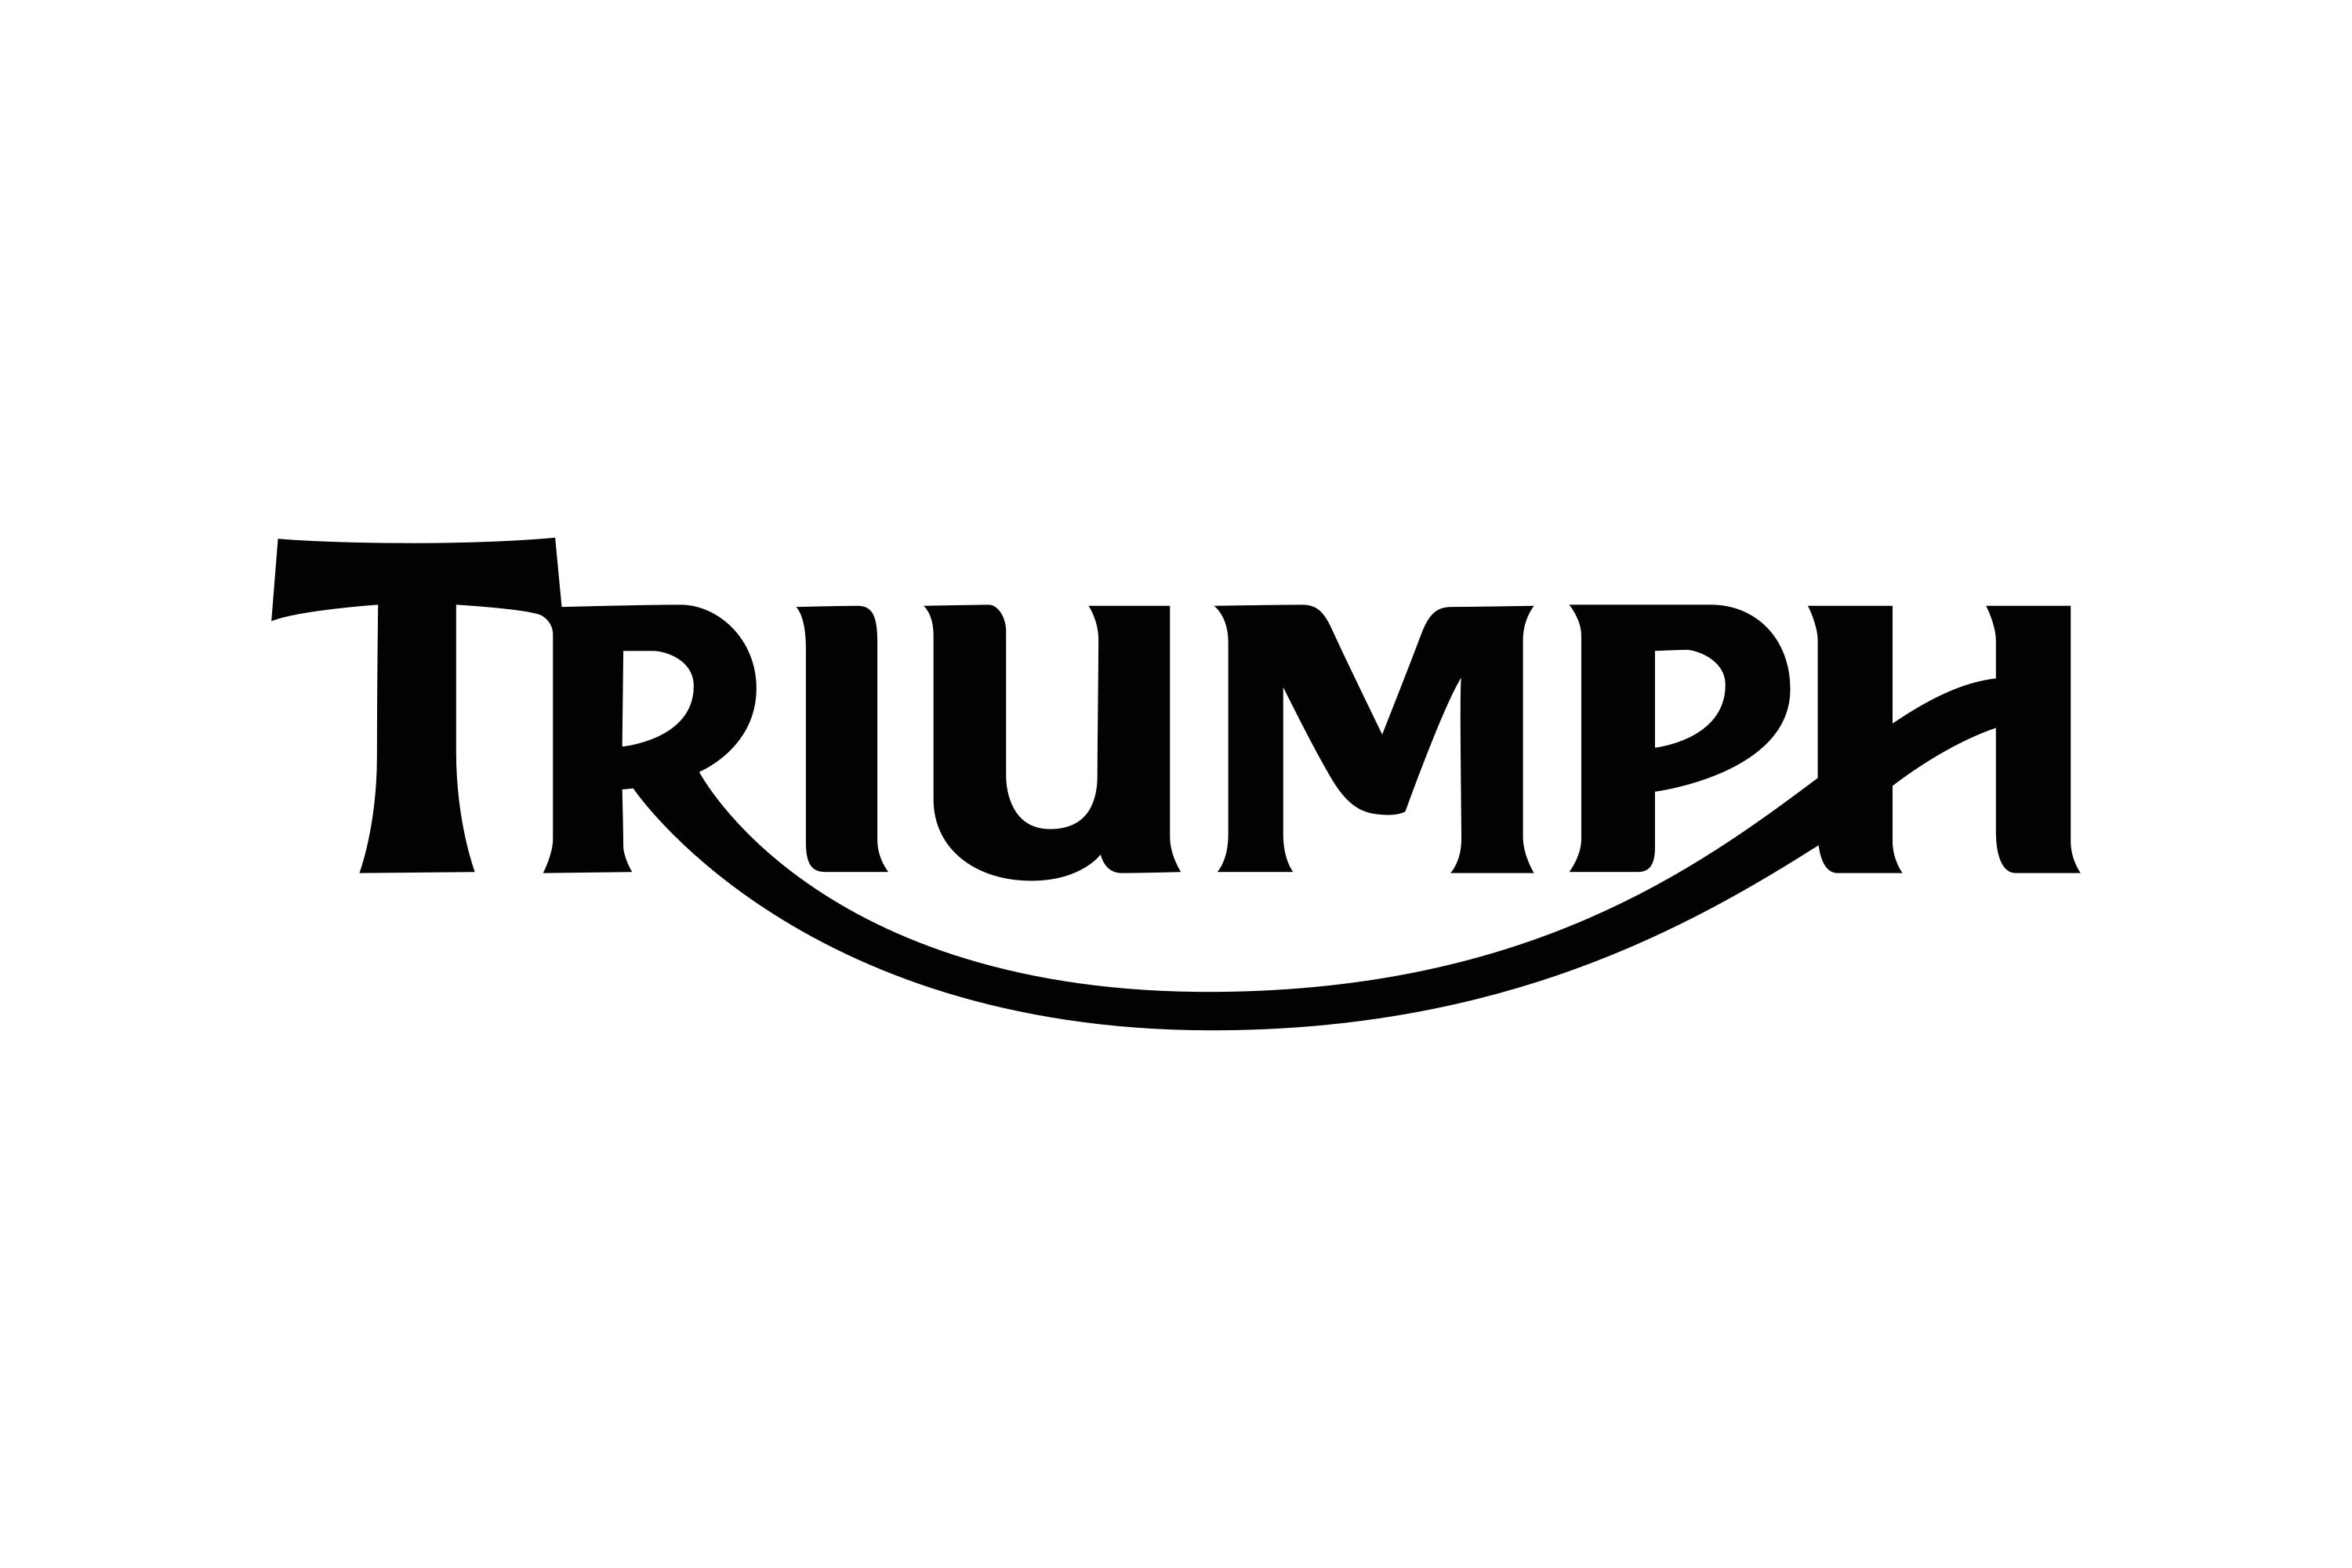 Download Triumph Motorcycles Ltd Logo In Svg Vector Or Png File Format Logo Wine